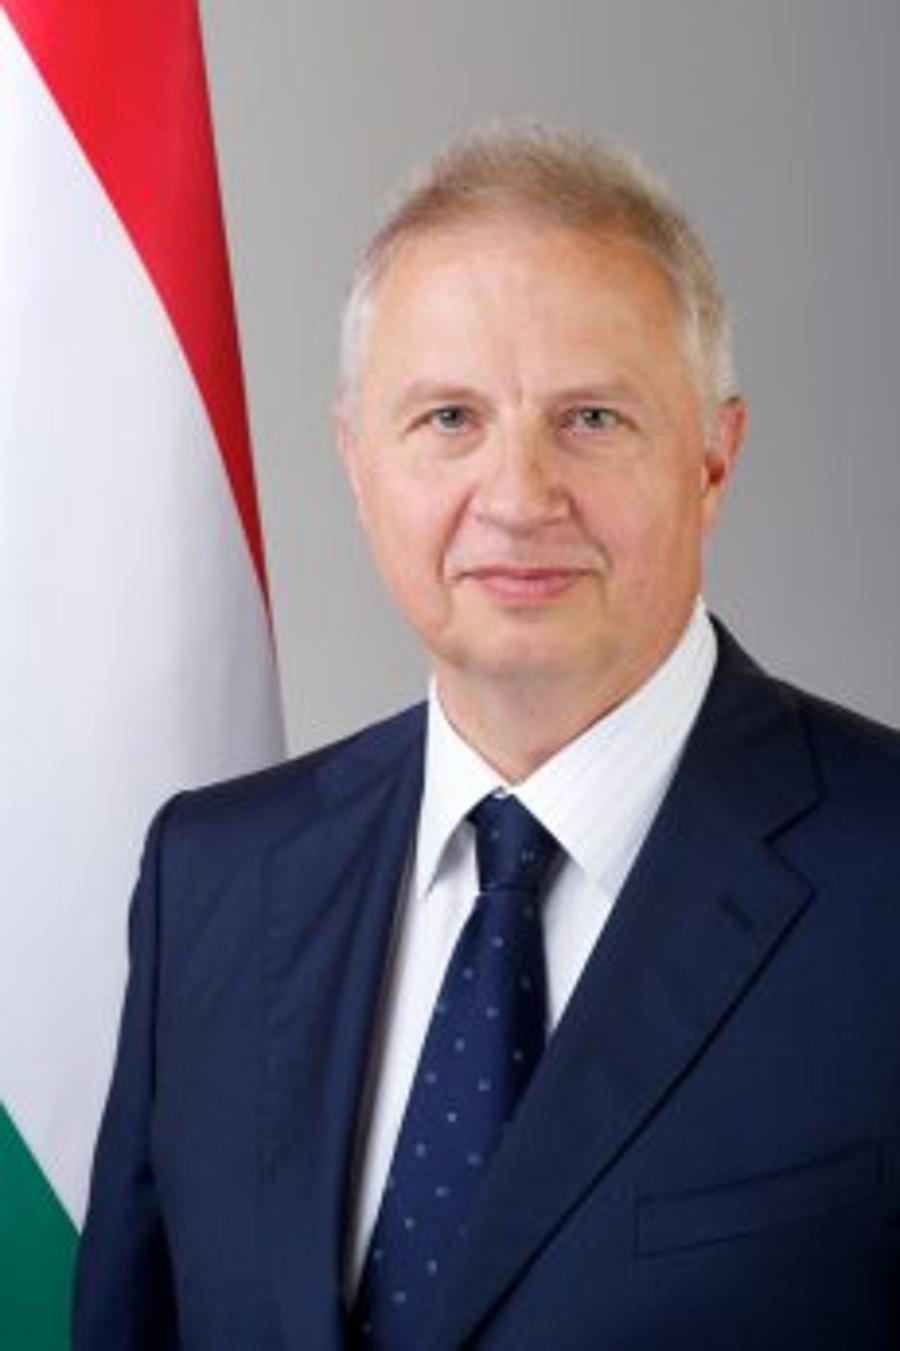 Minister Trócsányi Calls On Diplomats To Stave Off Criticism Of Hungary